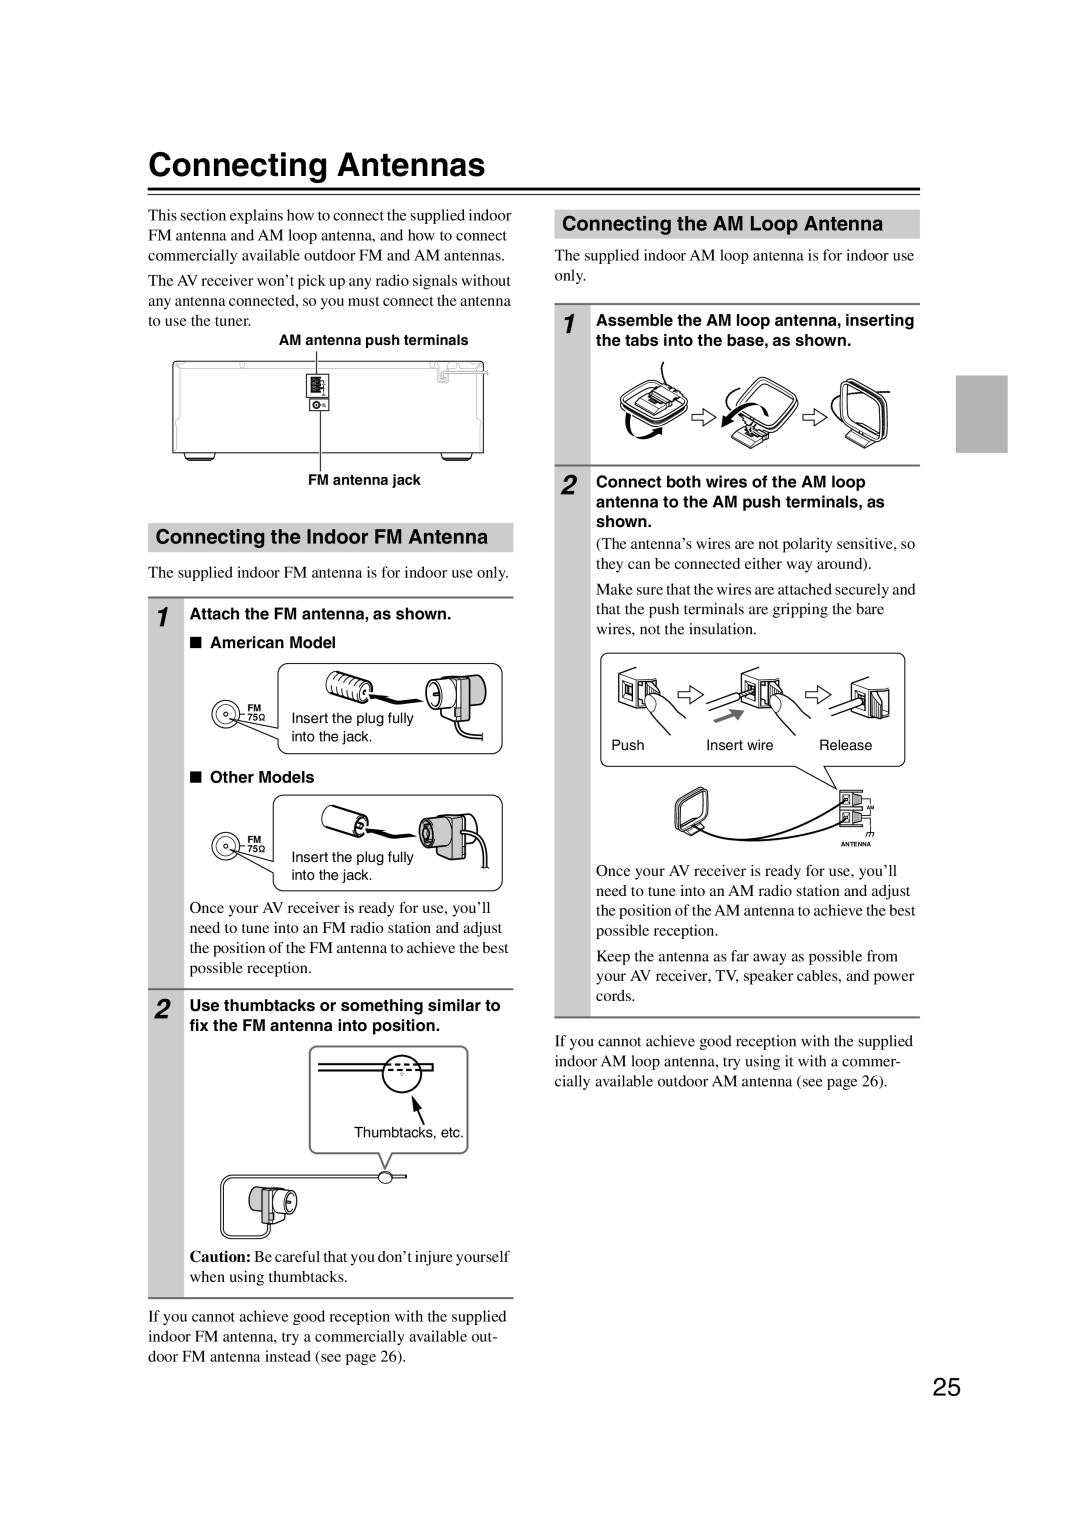 Onkyo HT-S5100 instruction manual Connecting Antennas, Connecting the AM Loop Antenna, Connecting the Indoor FM Antenna 